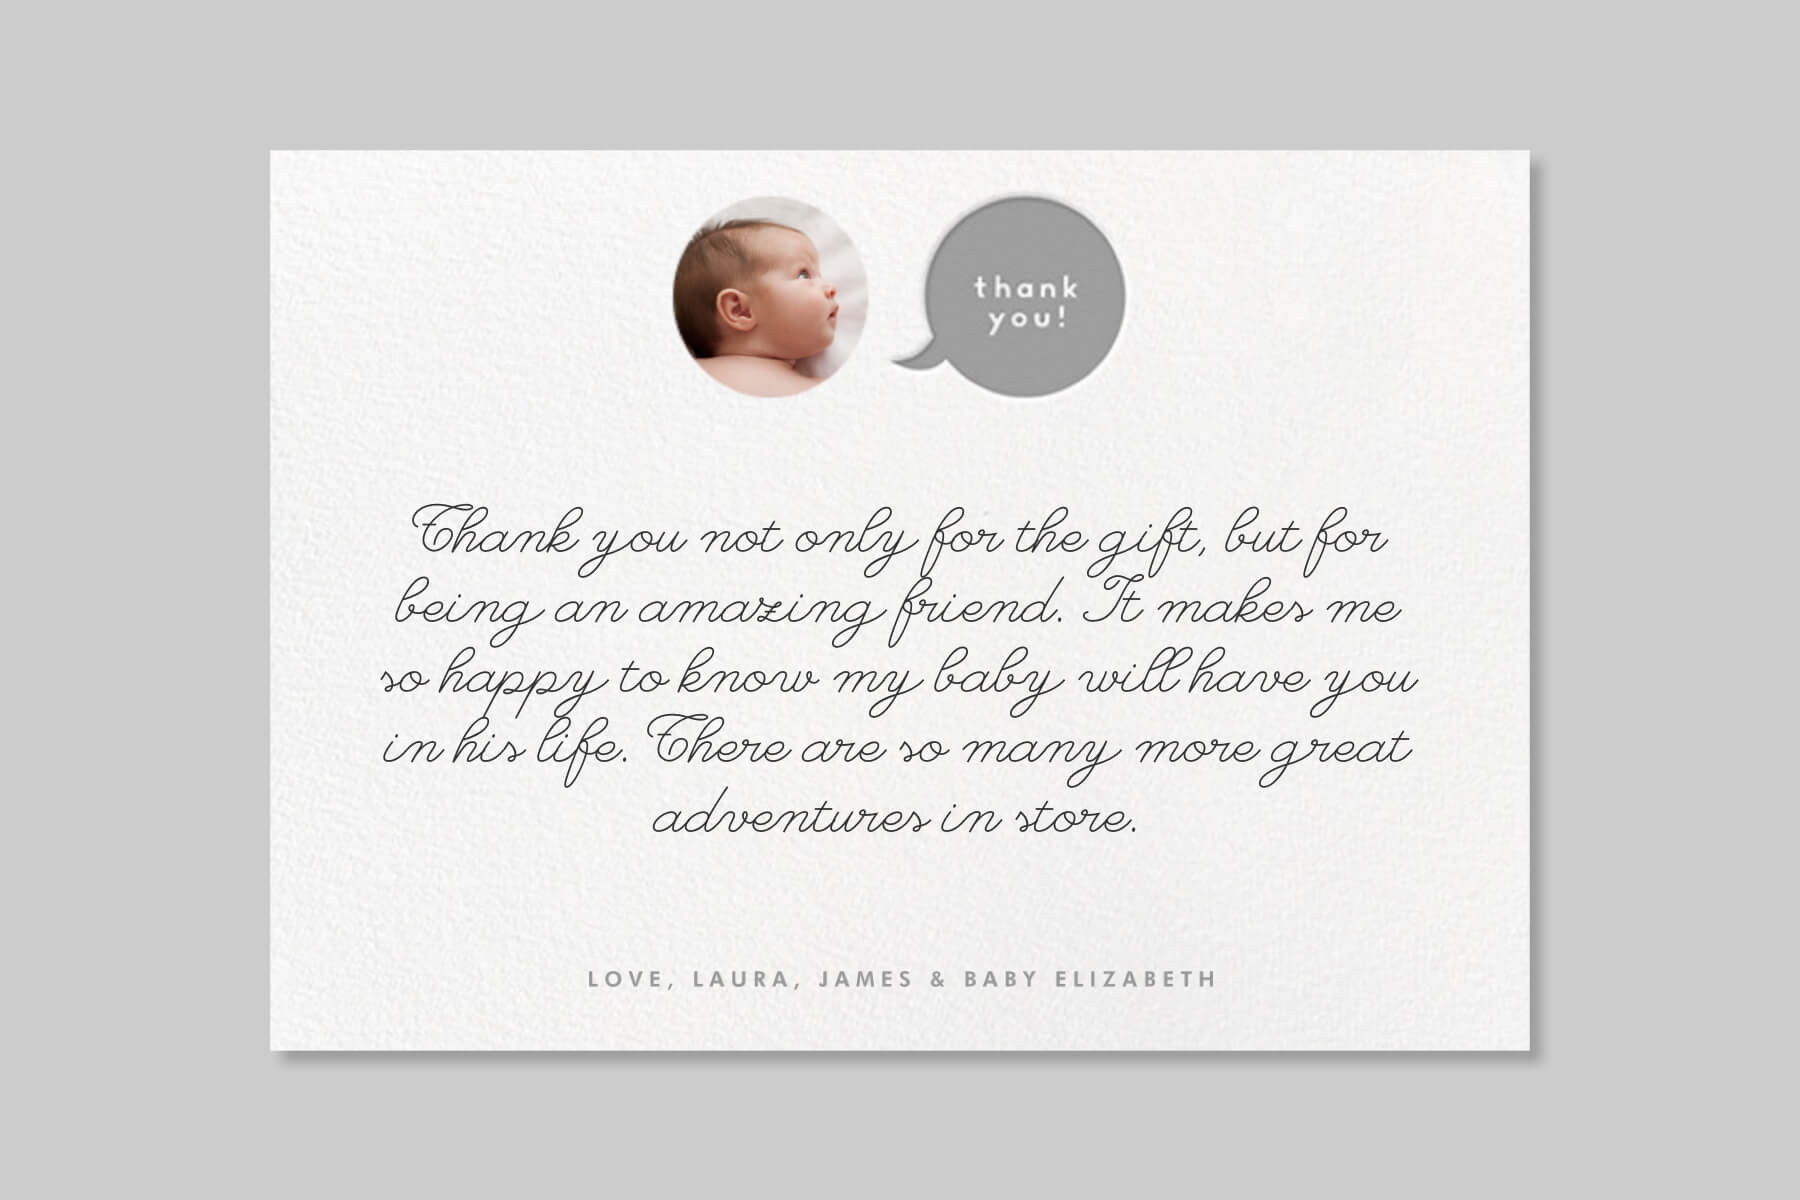 Baby Shower Thank You Wording - Paperless Post Within Template For Baby Shower Thank You Cards